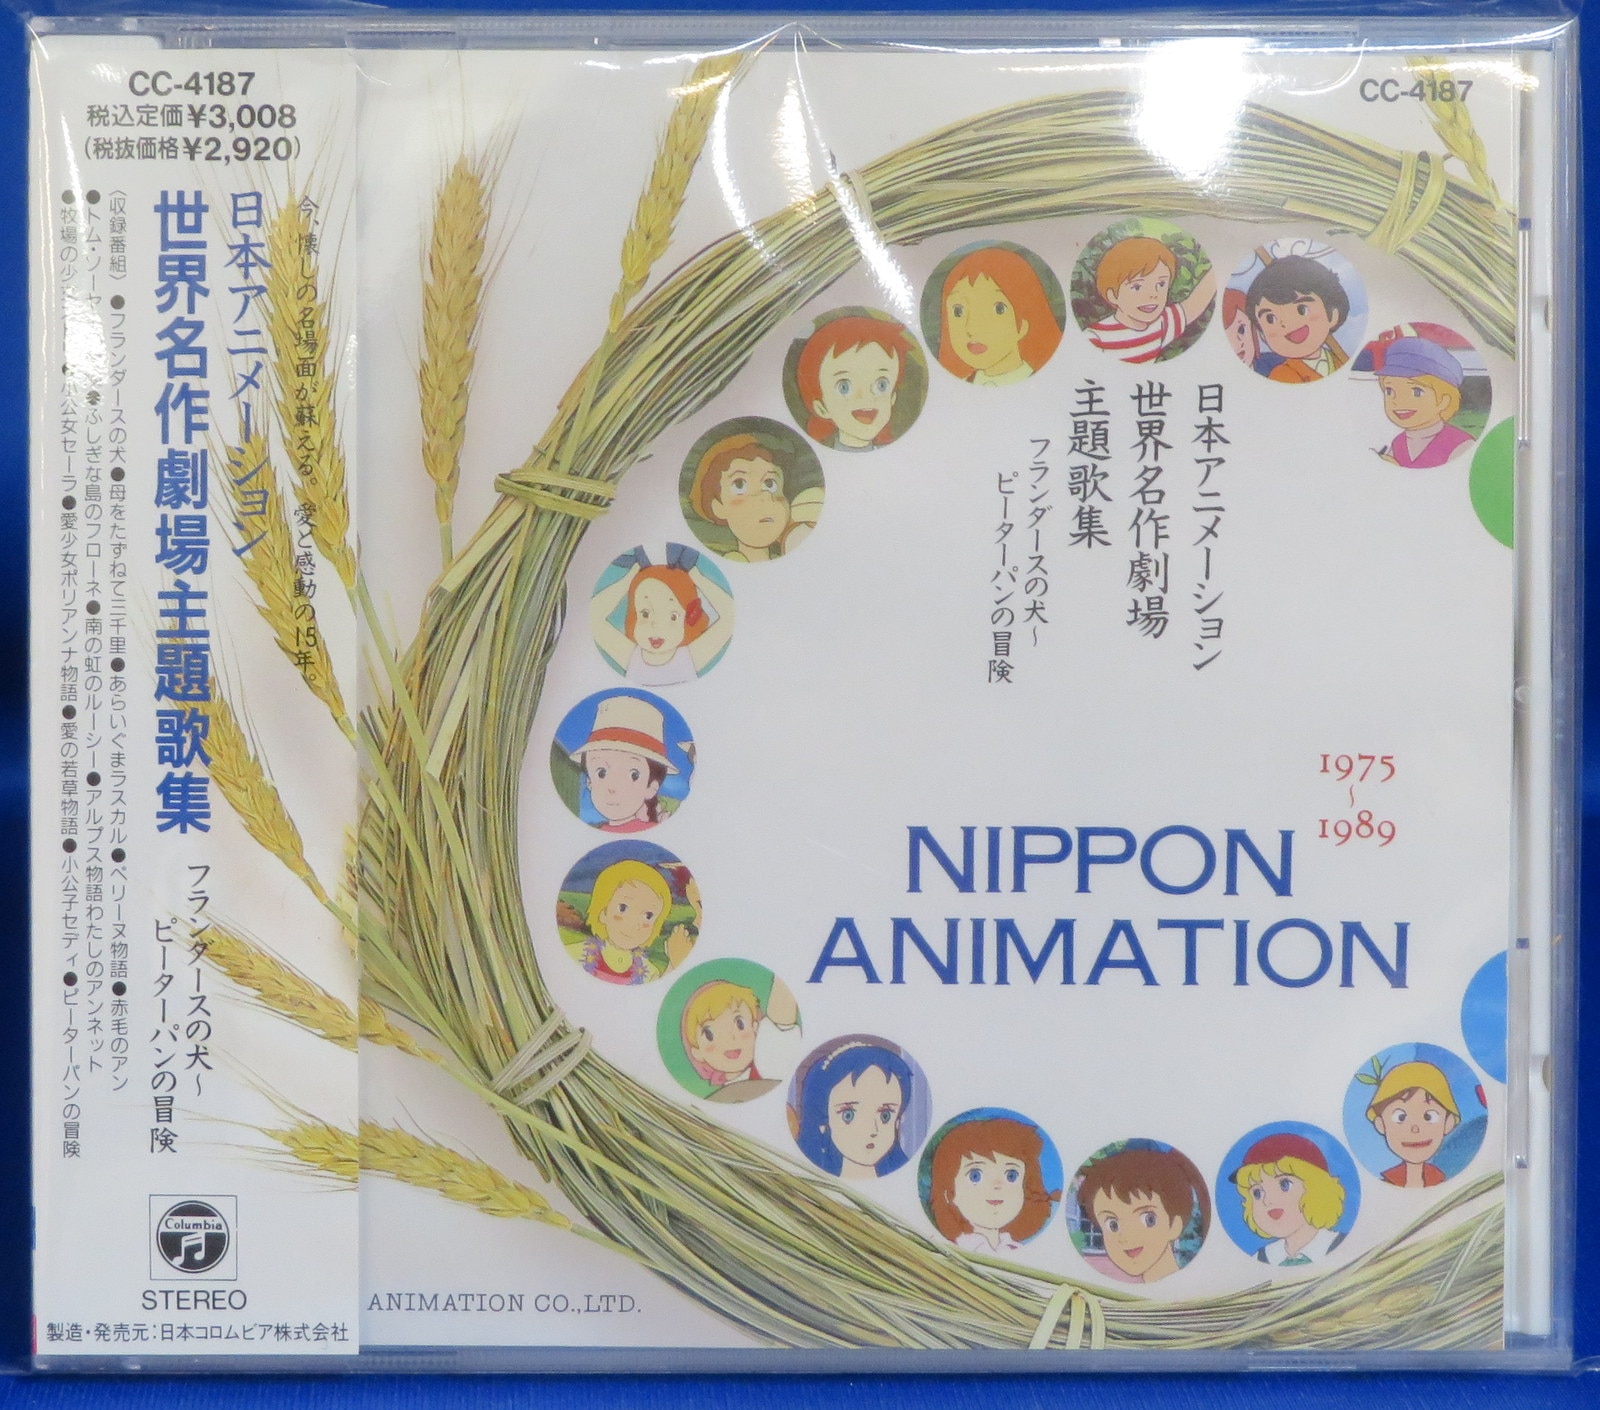 Nippon Columbia Anime Omnibus CD Japan Animation World Masterpiece Theater  Theme Song Collection Dog of Flanders - Peter Pan Adventure | Mandarake  Online Shop